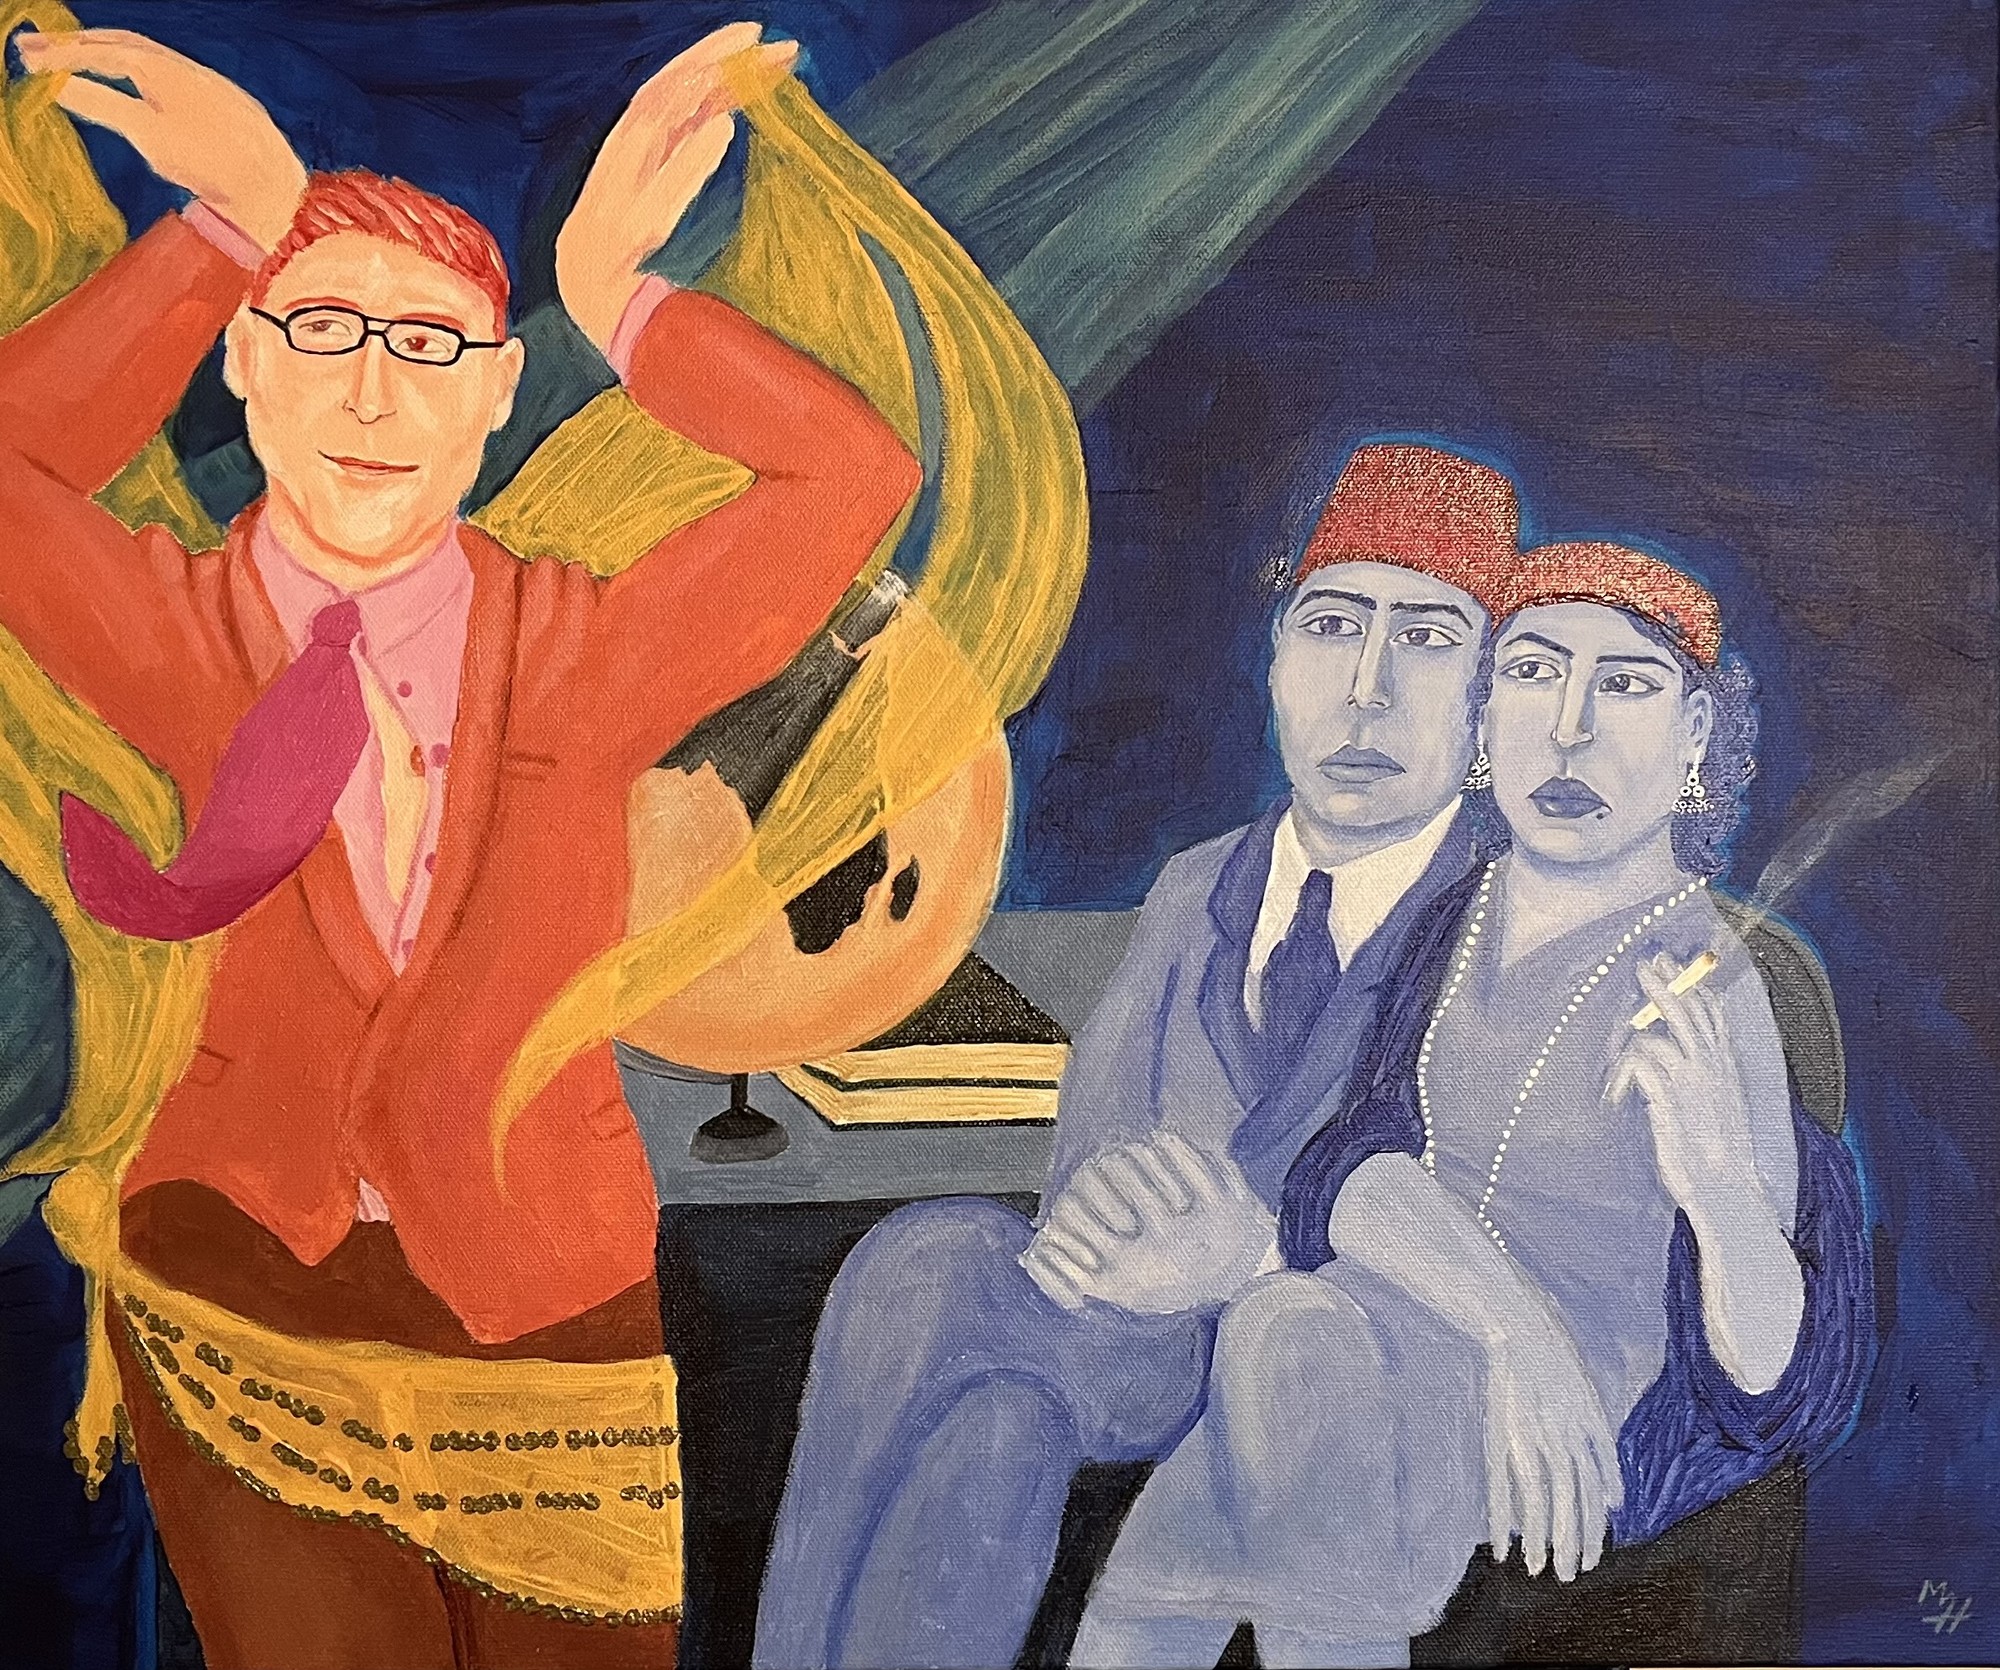 Massoud Hayoun - The chair of the Near Eastern Studies Department performs the Dance of the Seven Veils to a captive audience, 2023 - Acrylic on canvas - 50x61 cm